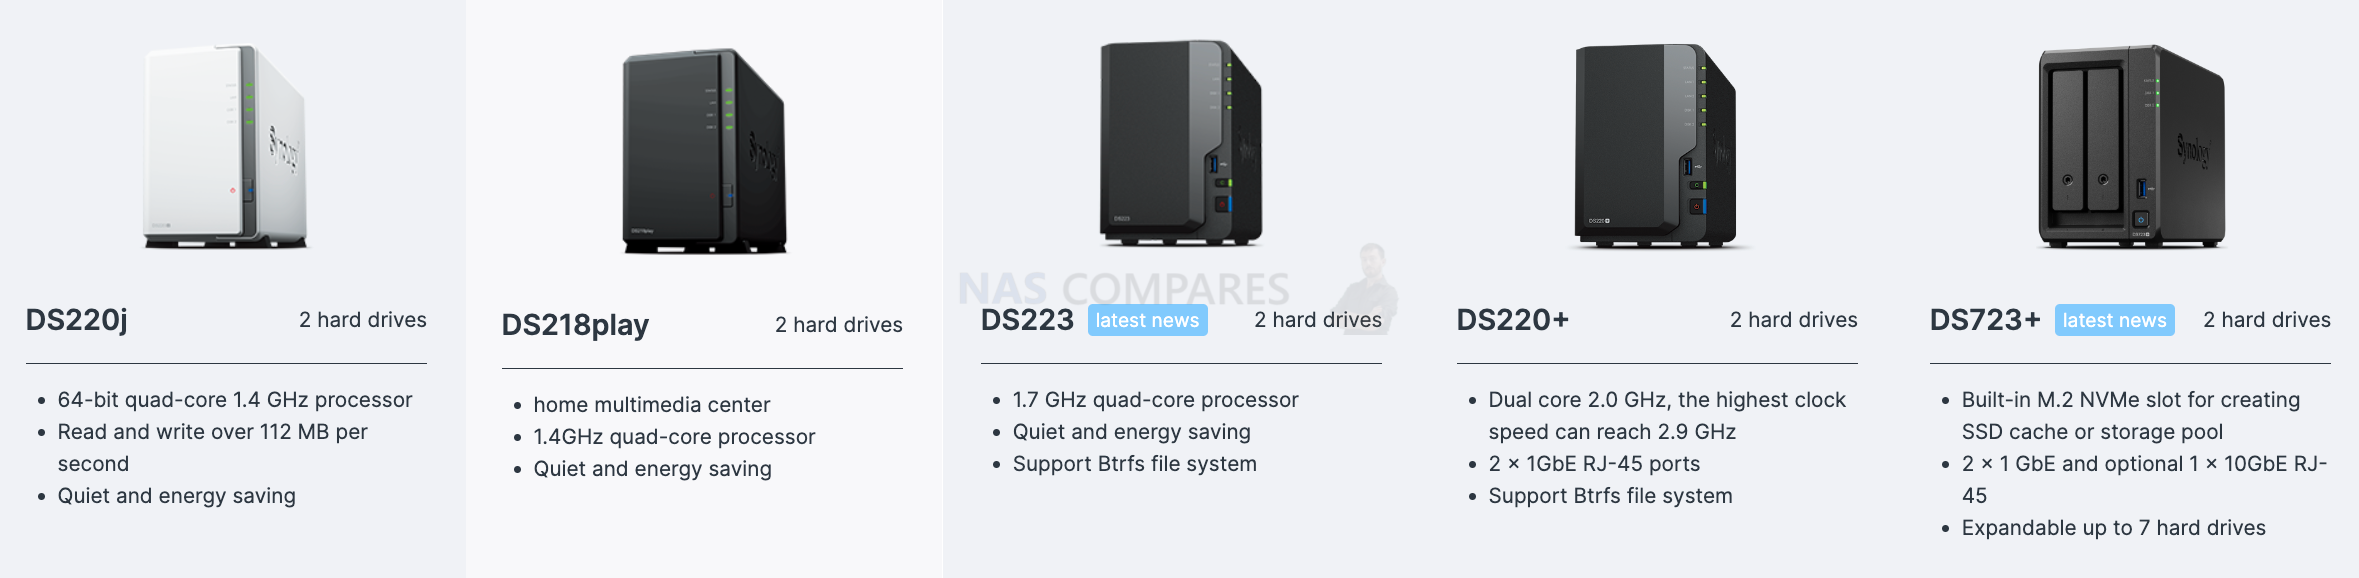 Synology 2-bay NAS range compared (DS220j, DS218play, DS223, DS220+, DS723+)